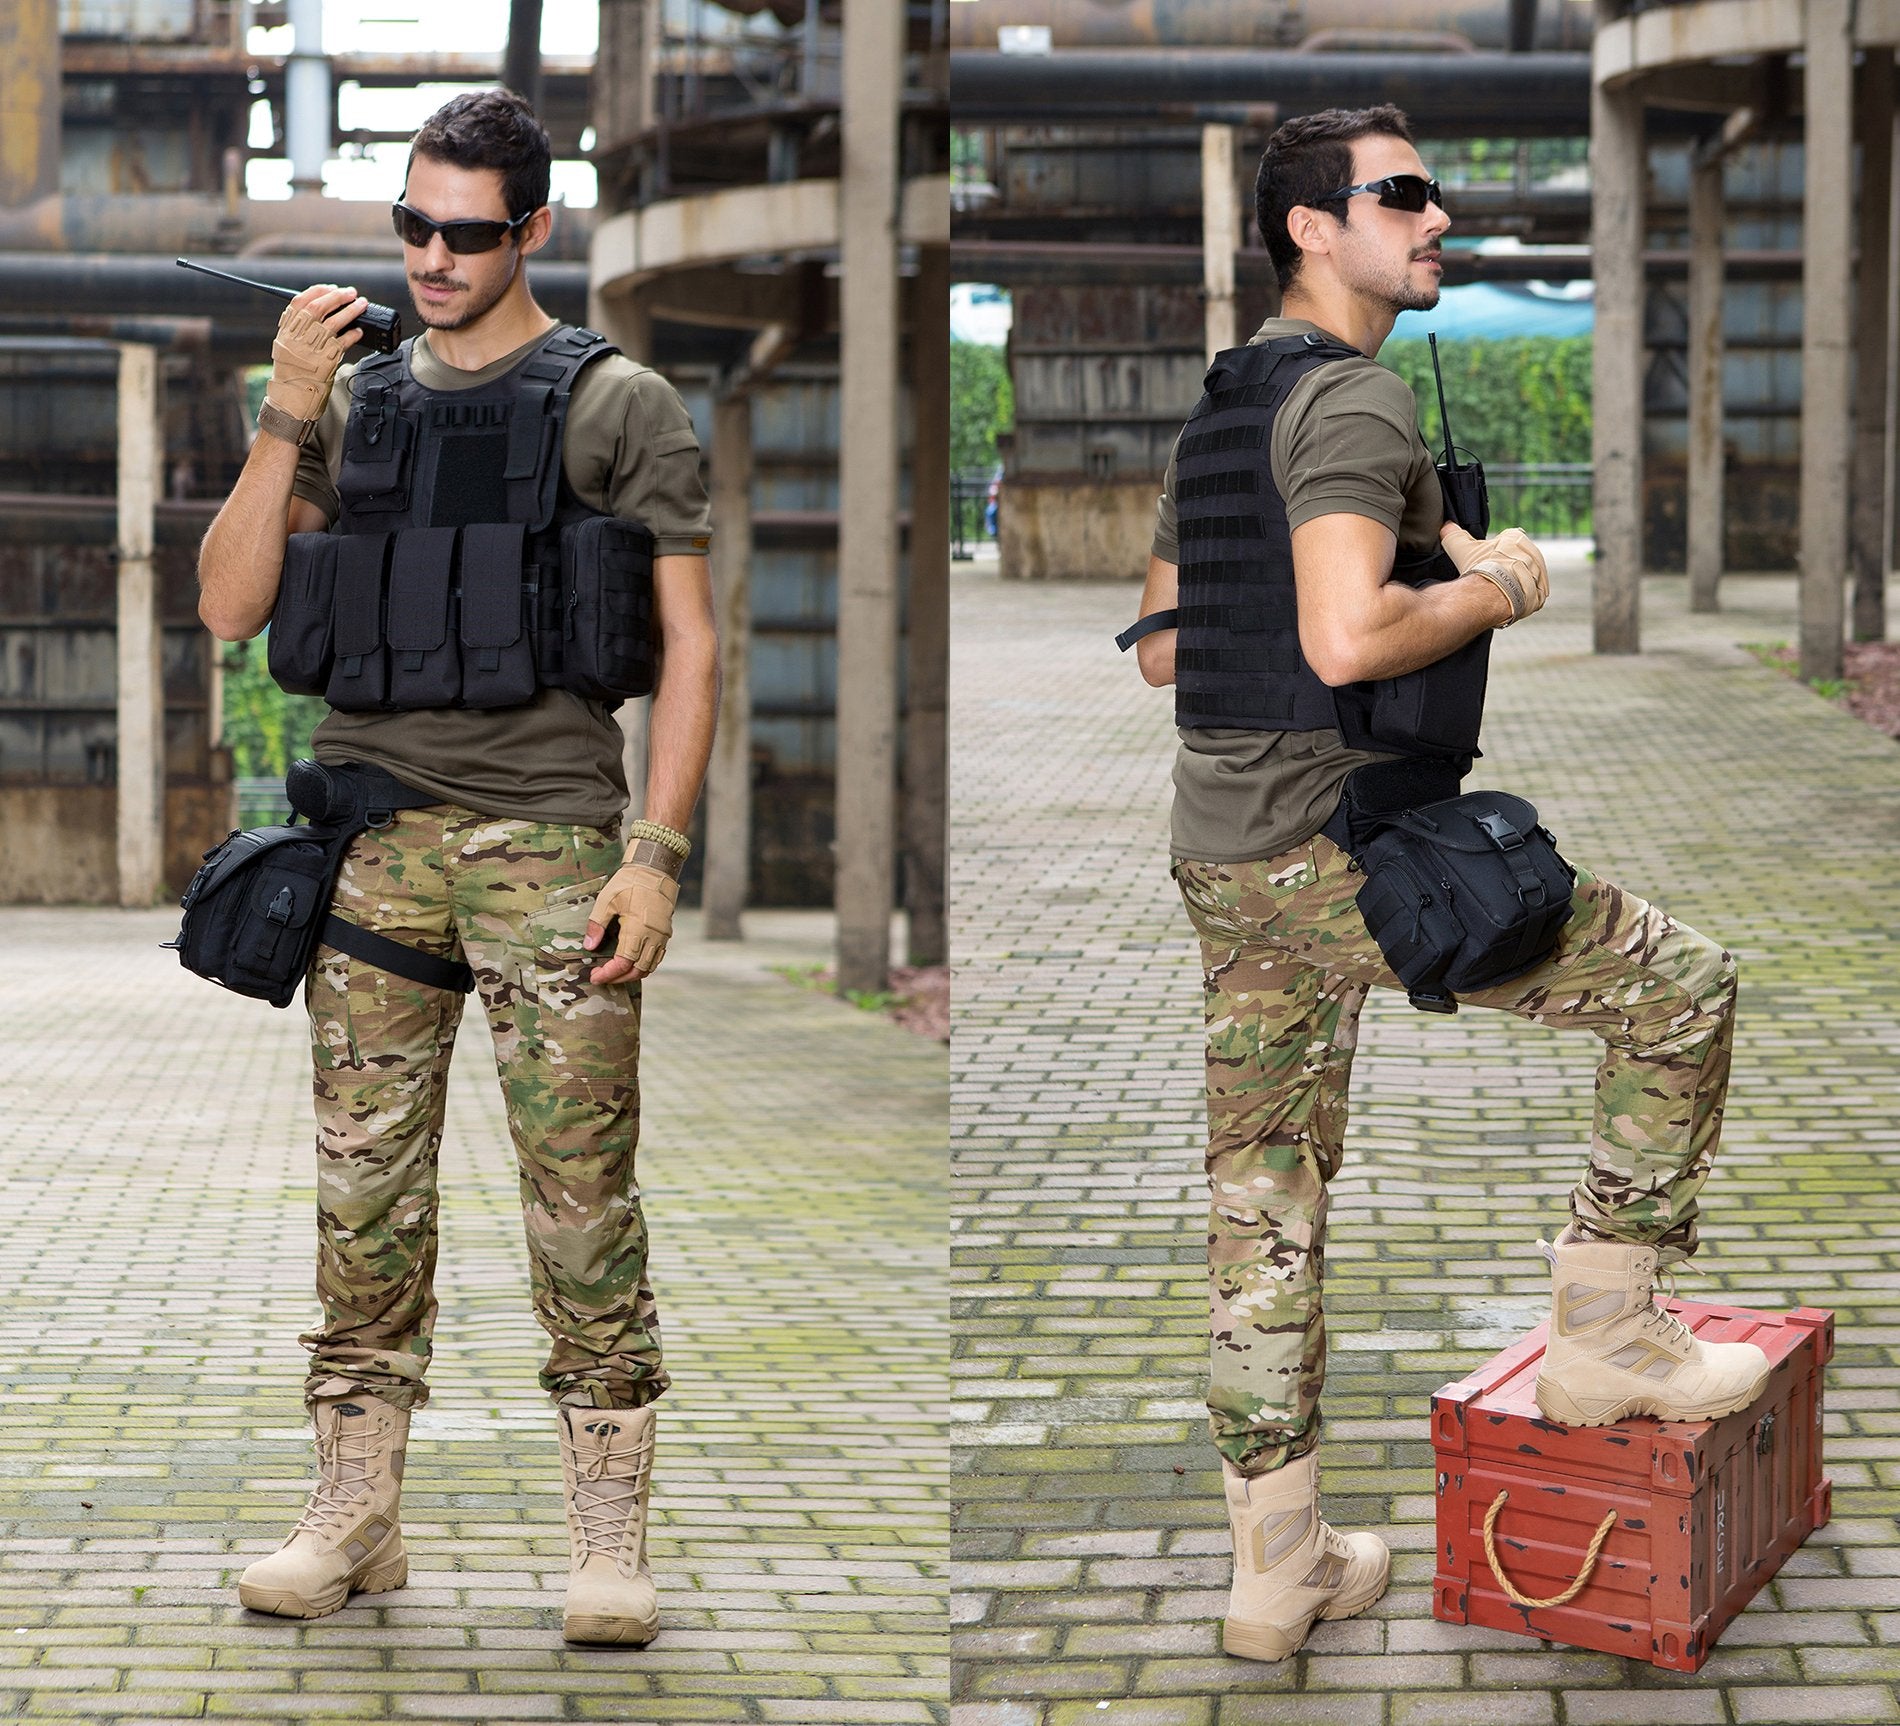 2021 All-new Upgraded Special Forces Tactical Vest